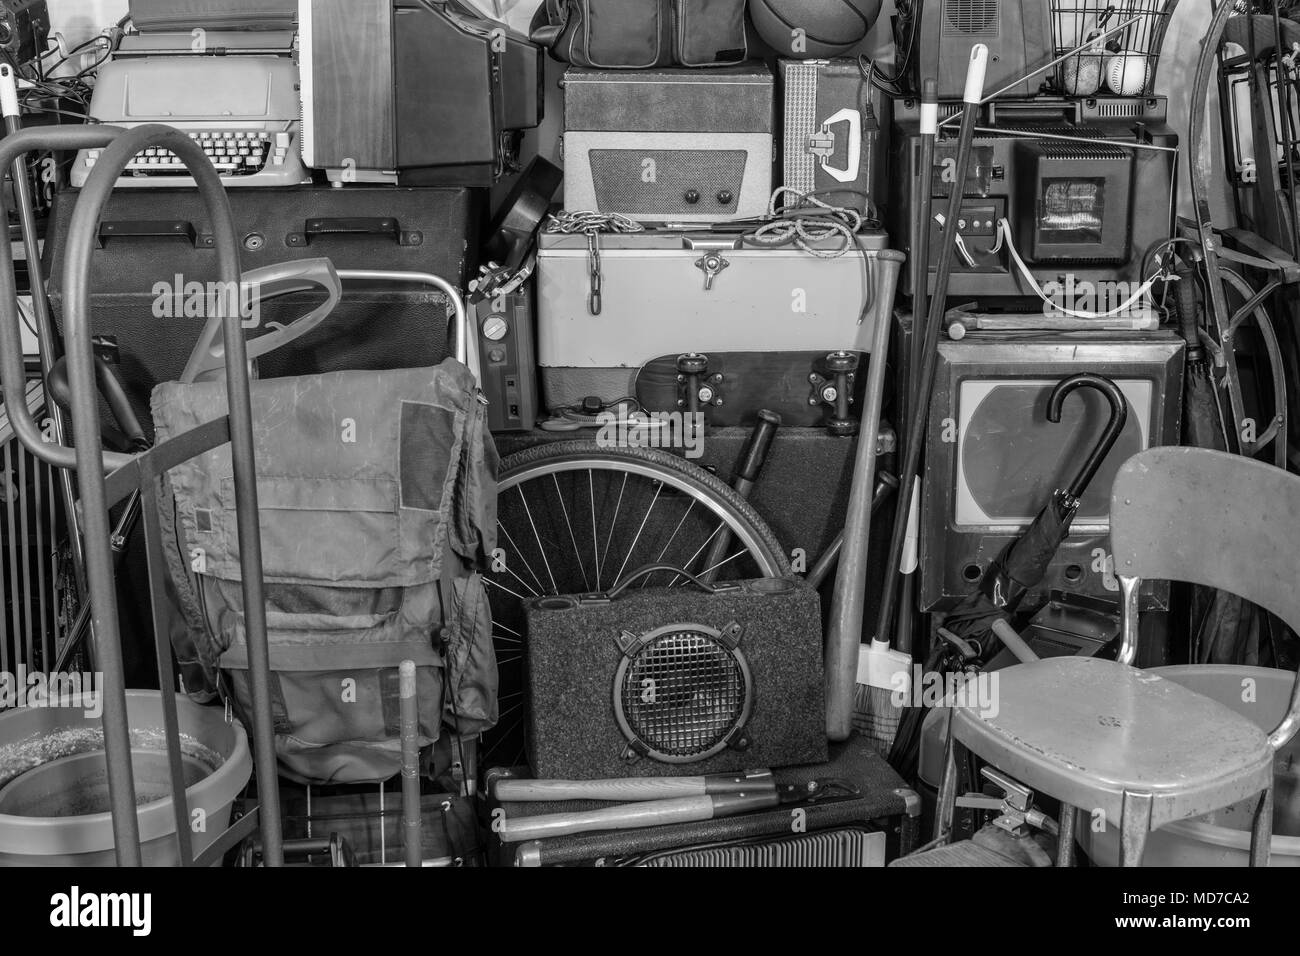 Vintage garage storage area with old tools, gardening, music and sports equipment in black and white. Stock Photo